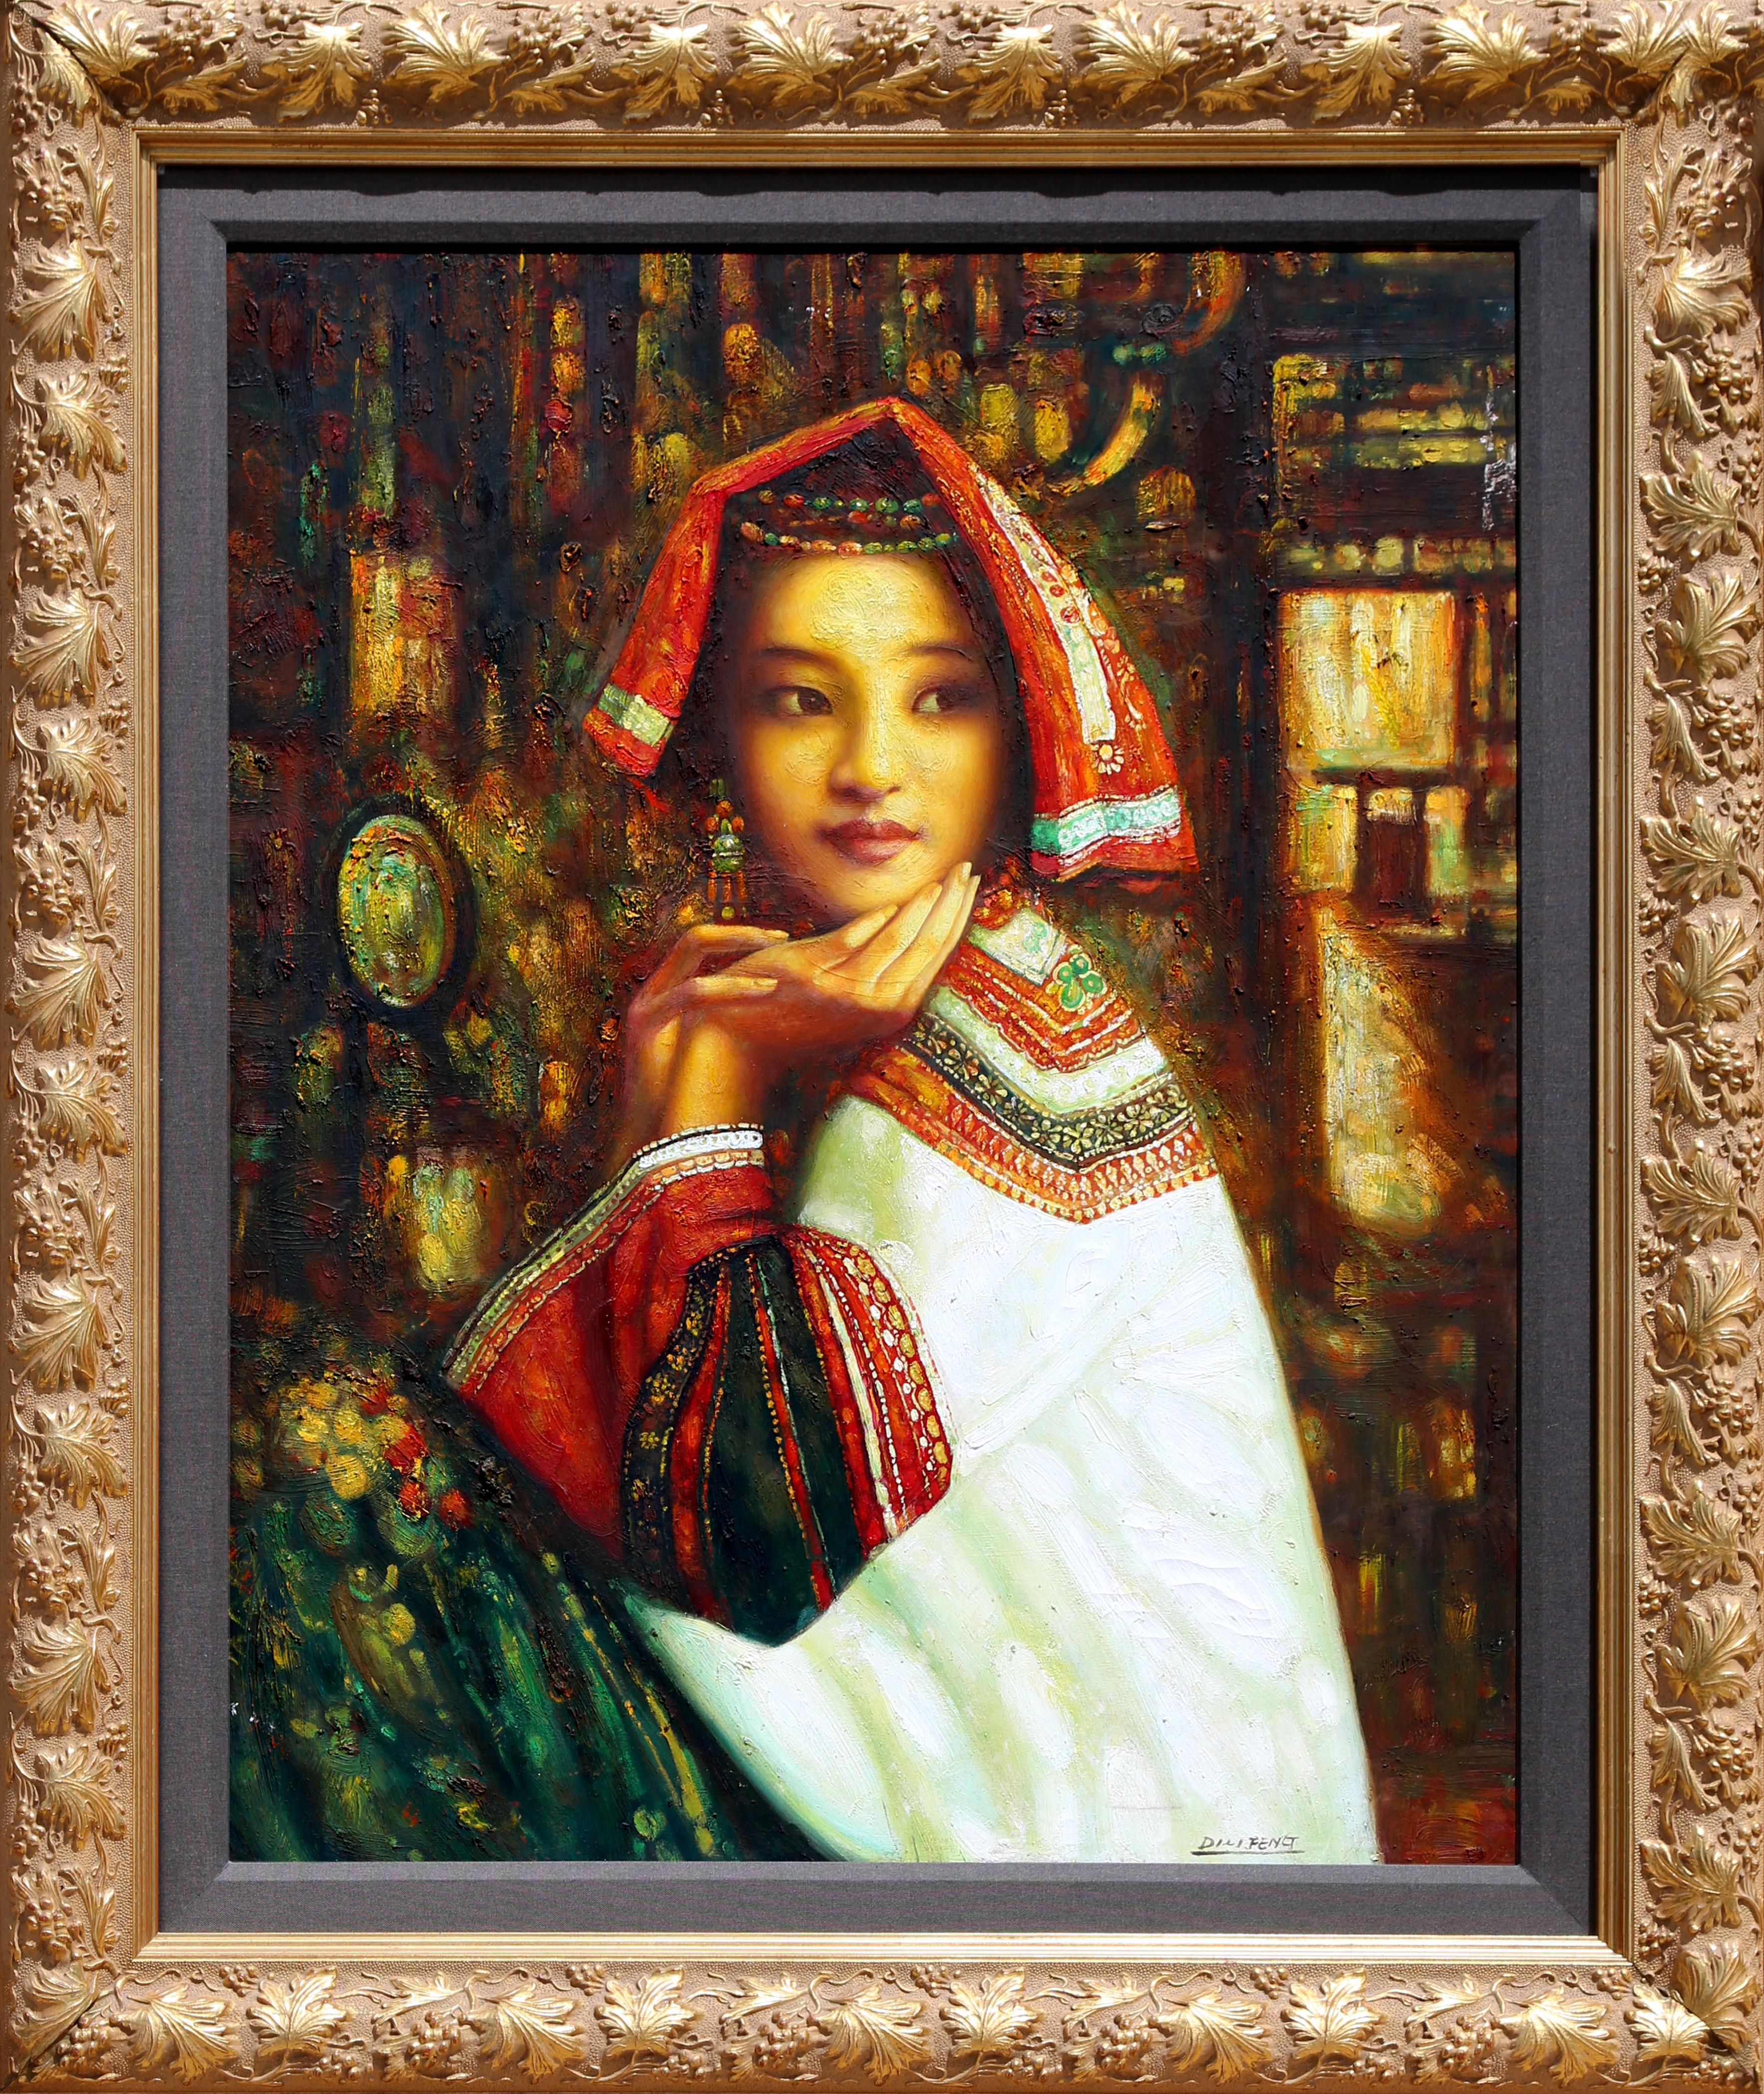 Di Li Feng Portrait Painting - Portrait of a Girl in Traditional Garb, Oil Painting